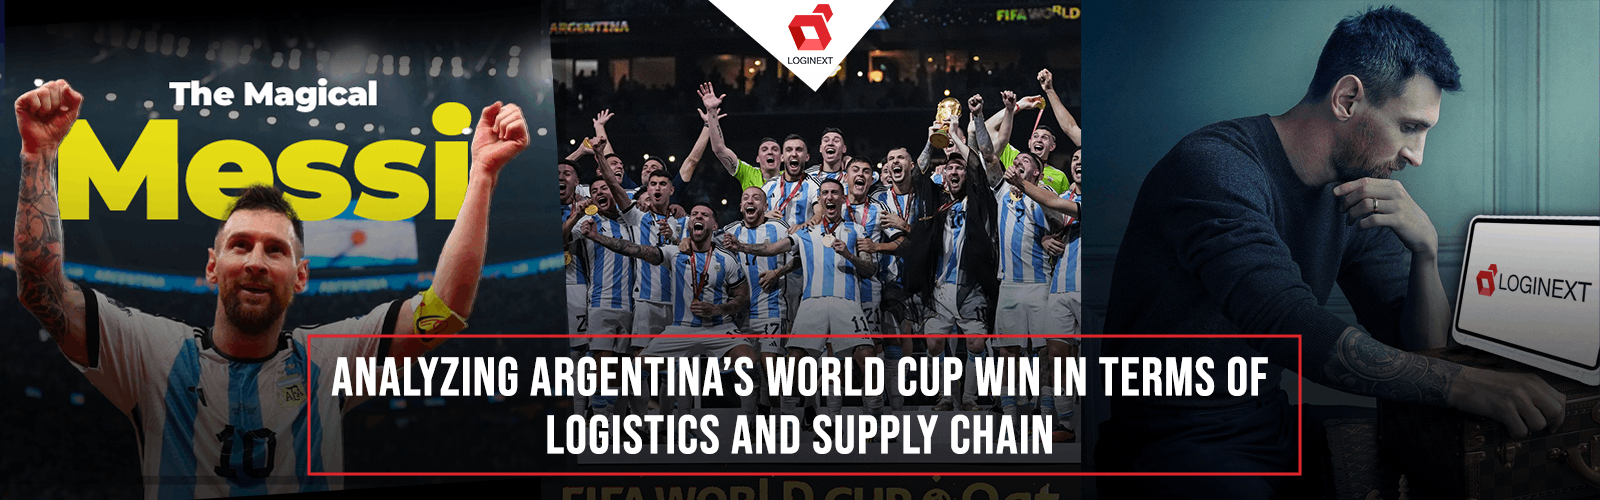 Analyzing Argentina’s World Cup Win In Terms of Logistics and Supply Chain